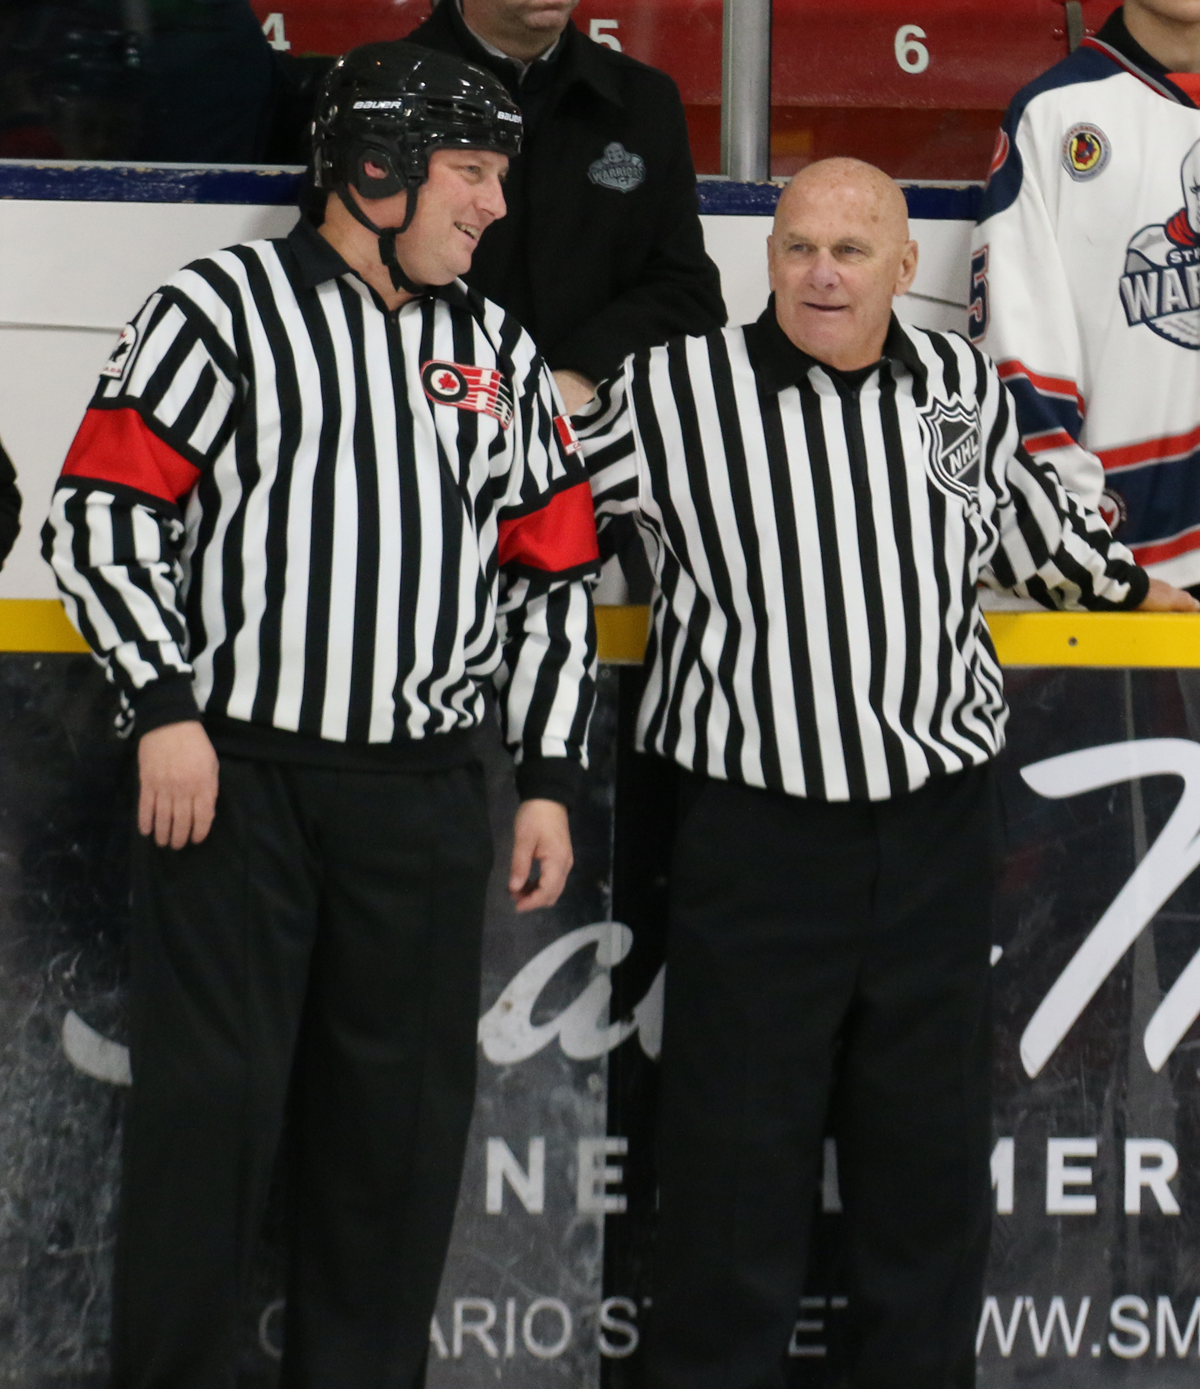 Photos show referee from Stratford picking up missing Stanley Cup puck